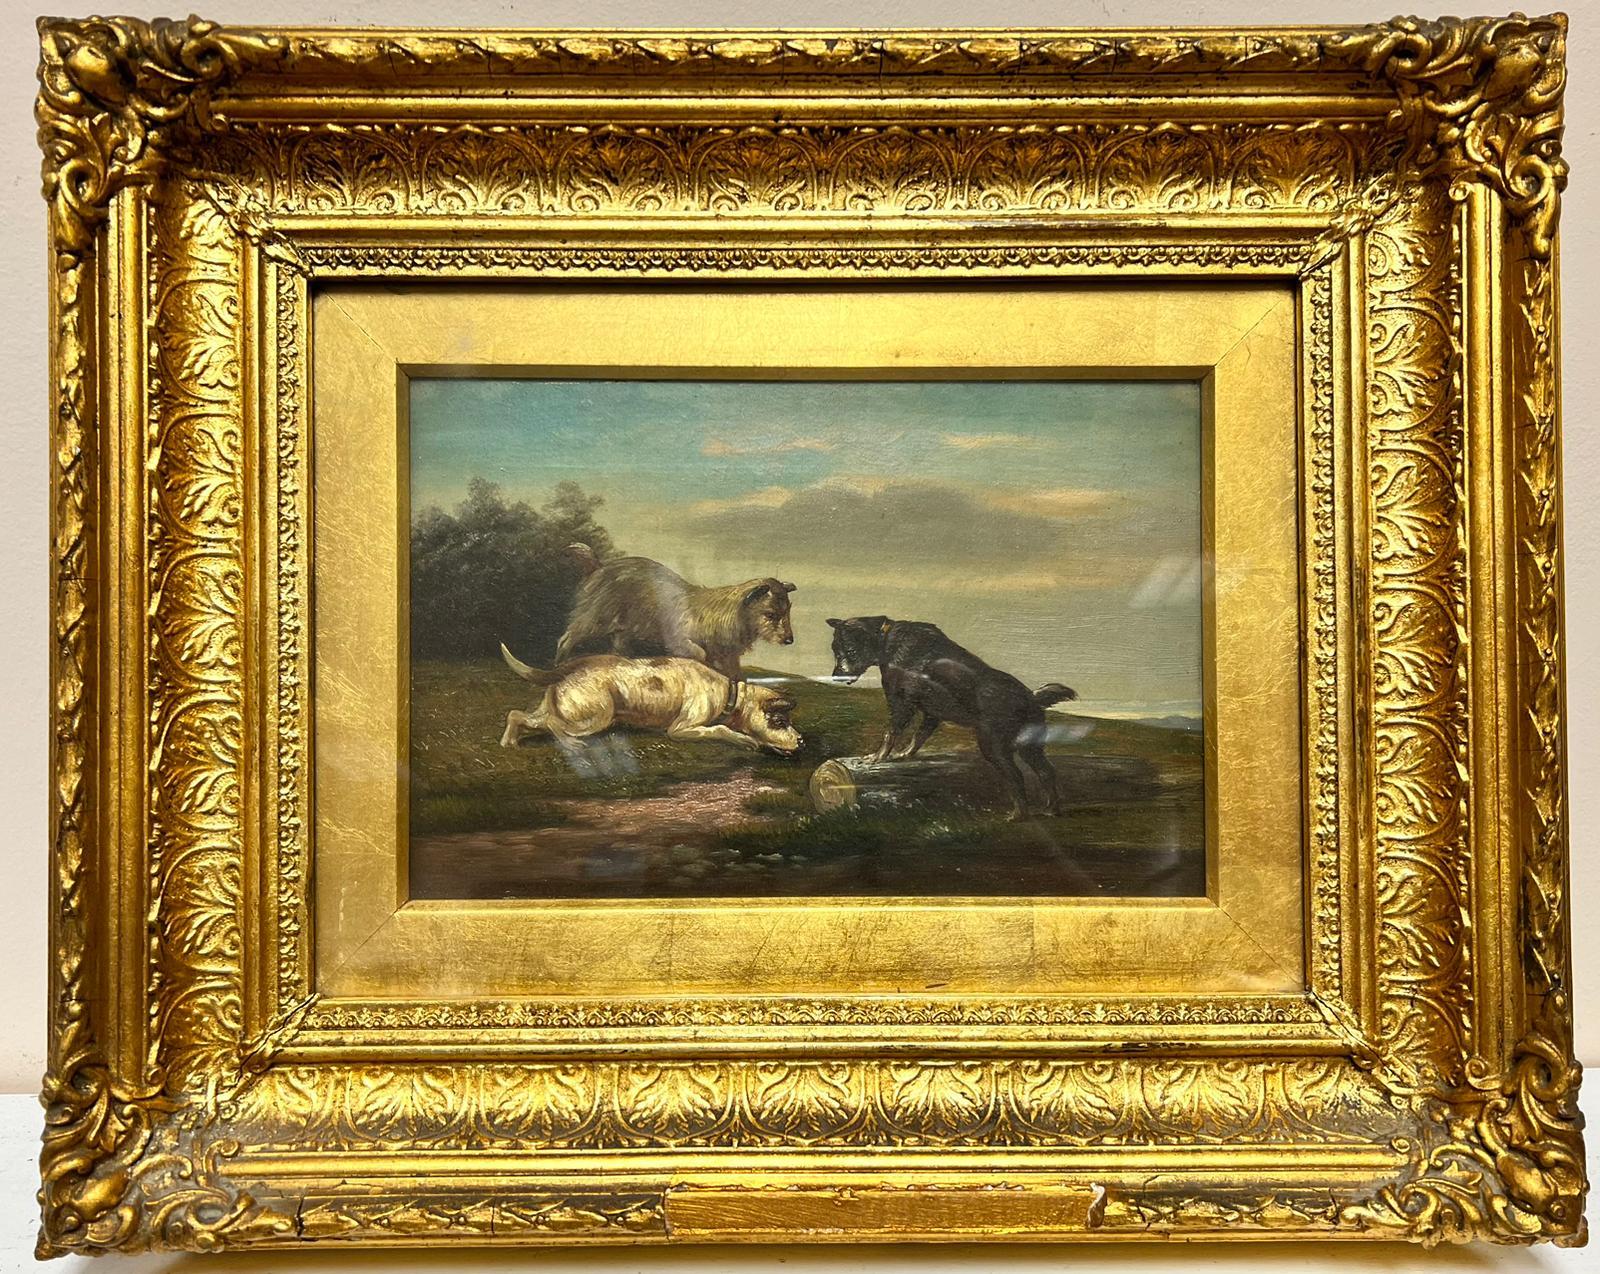 19th Century English School Landscape Painting - Victorian English Dog Painting Three Dogs Exploring in an Open Landscape